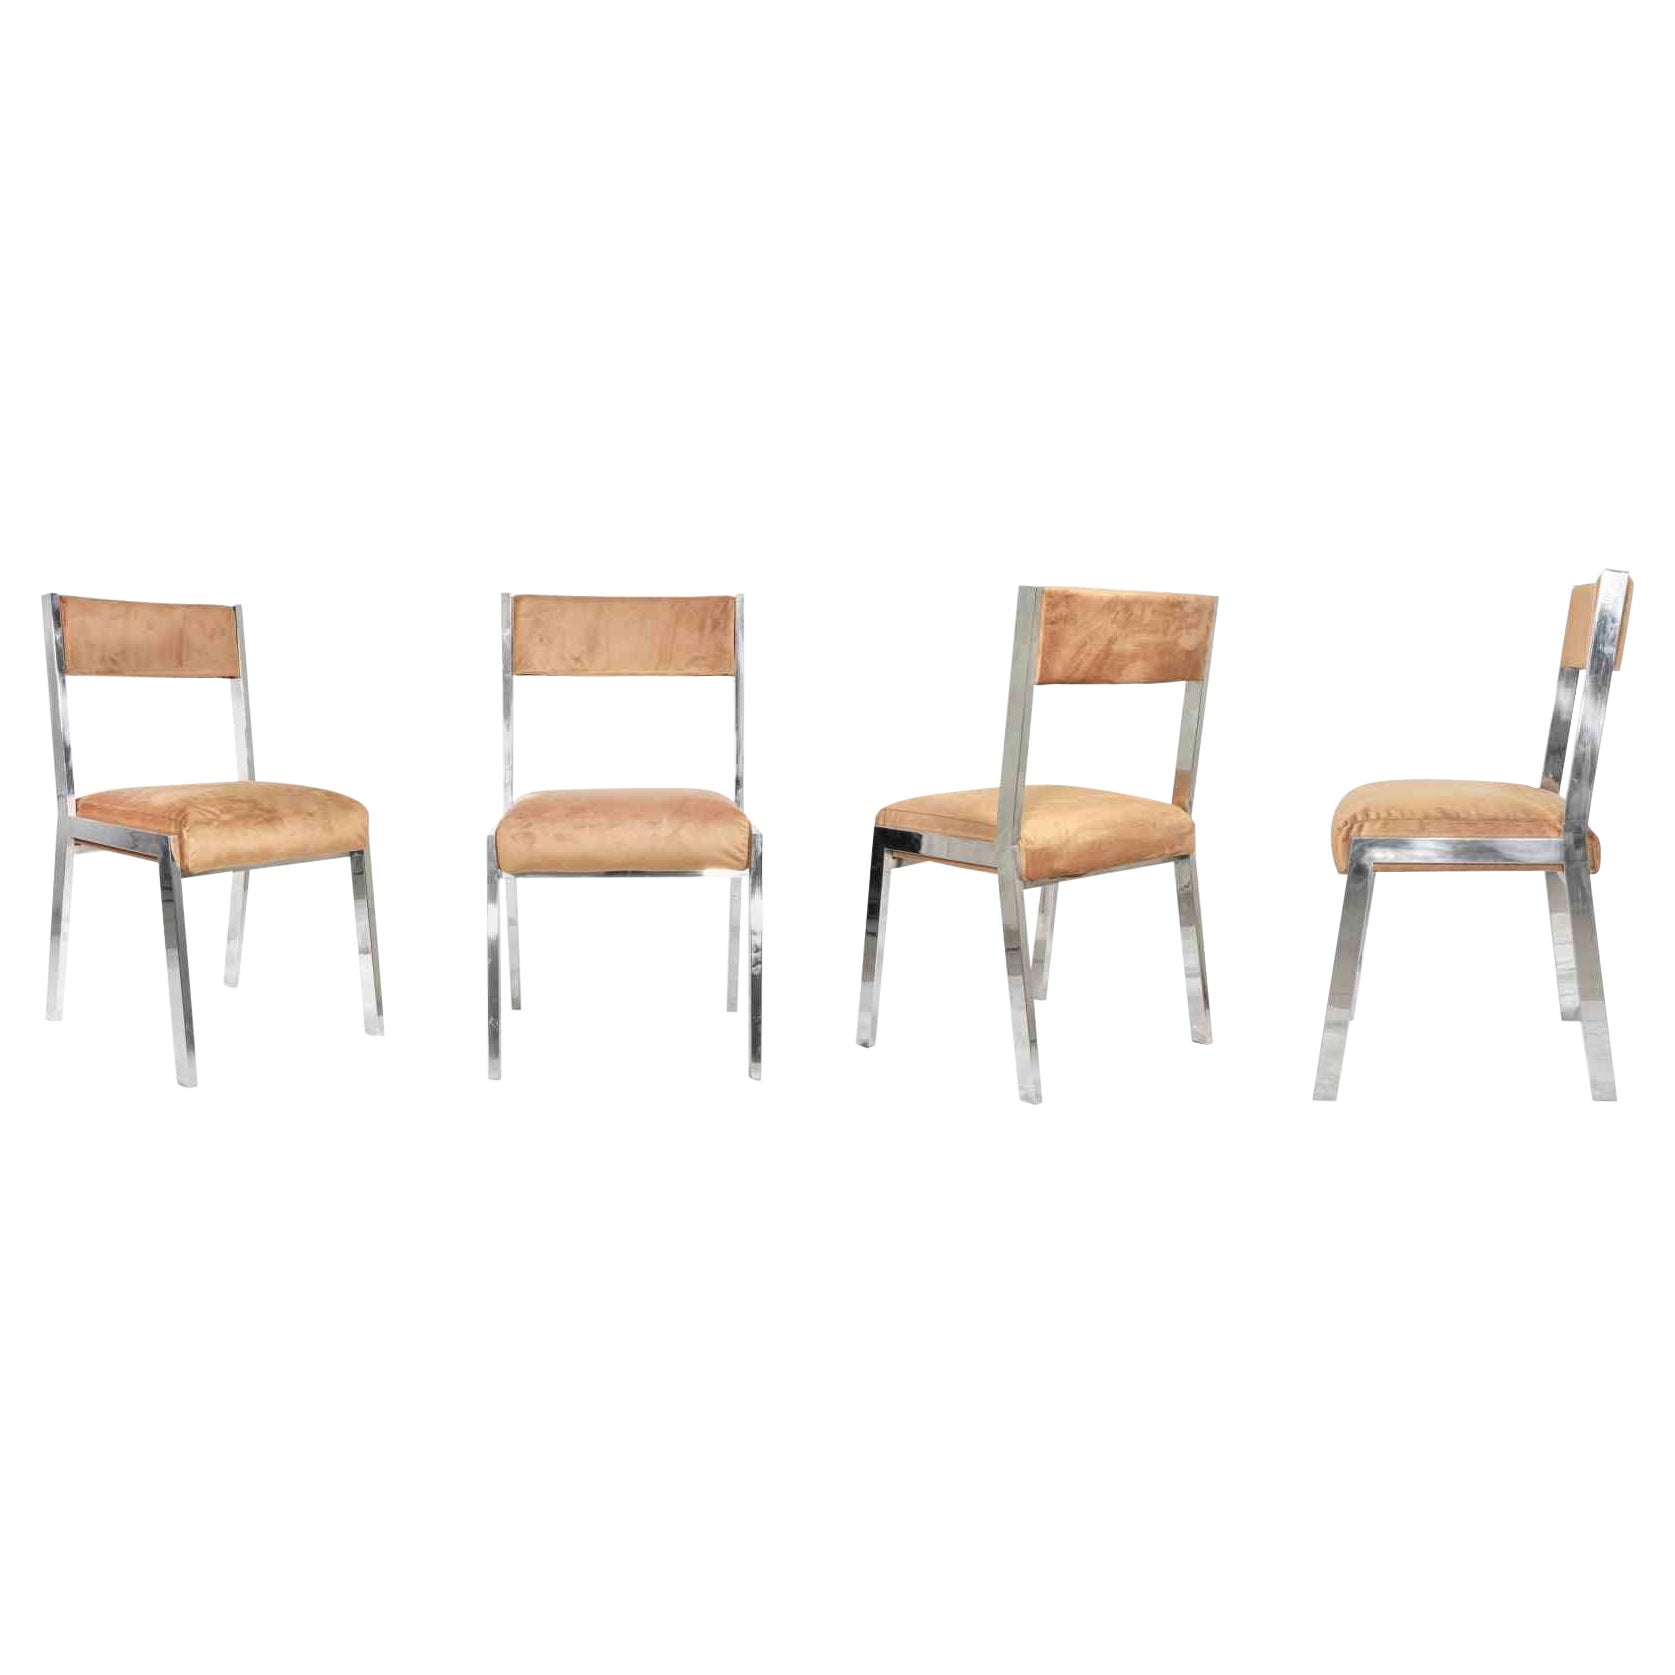 Set of 4 Chairs by Willy Rizzo, Italy, 1970s For Sale